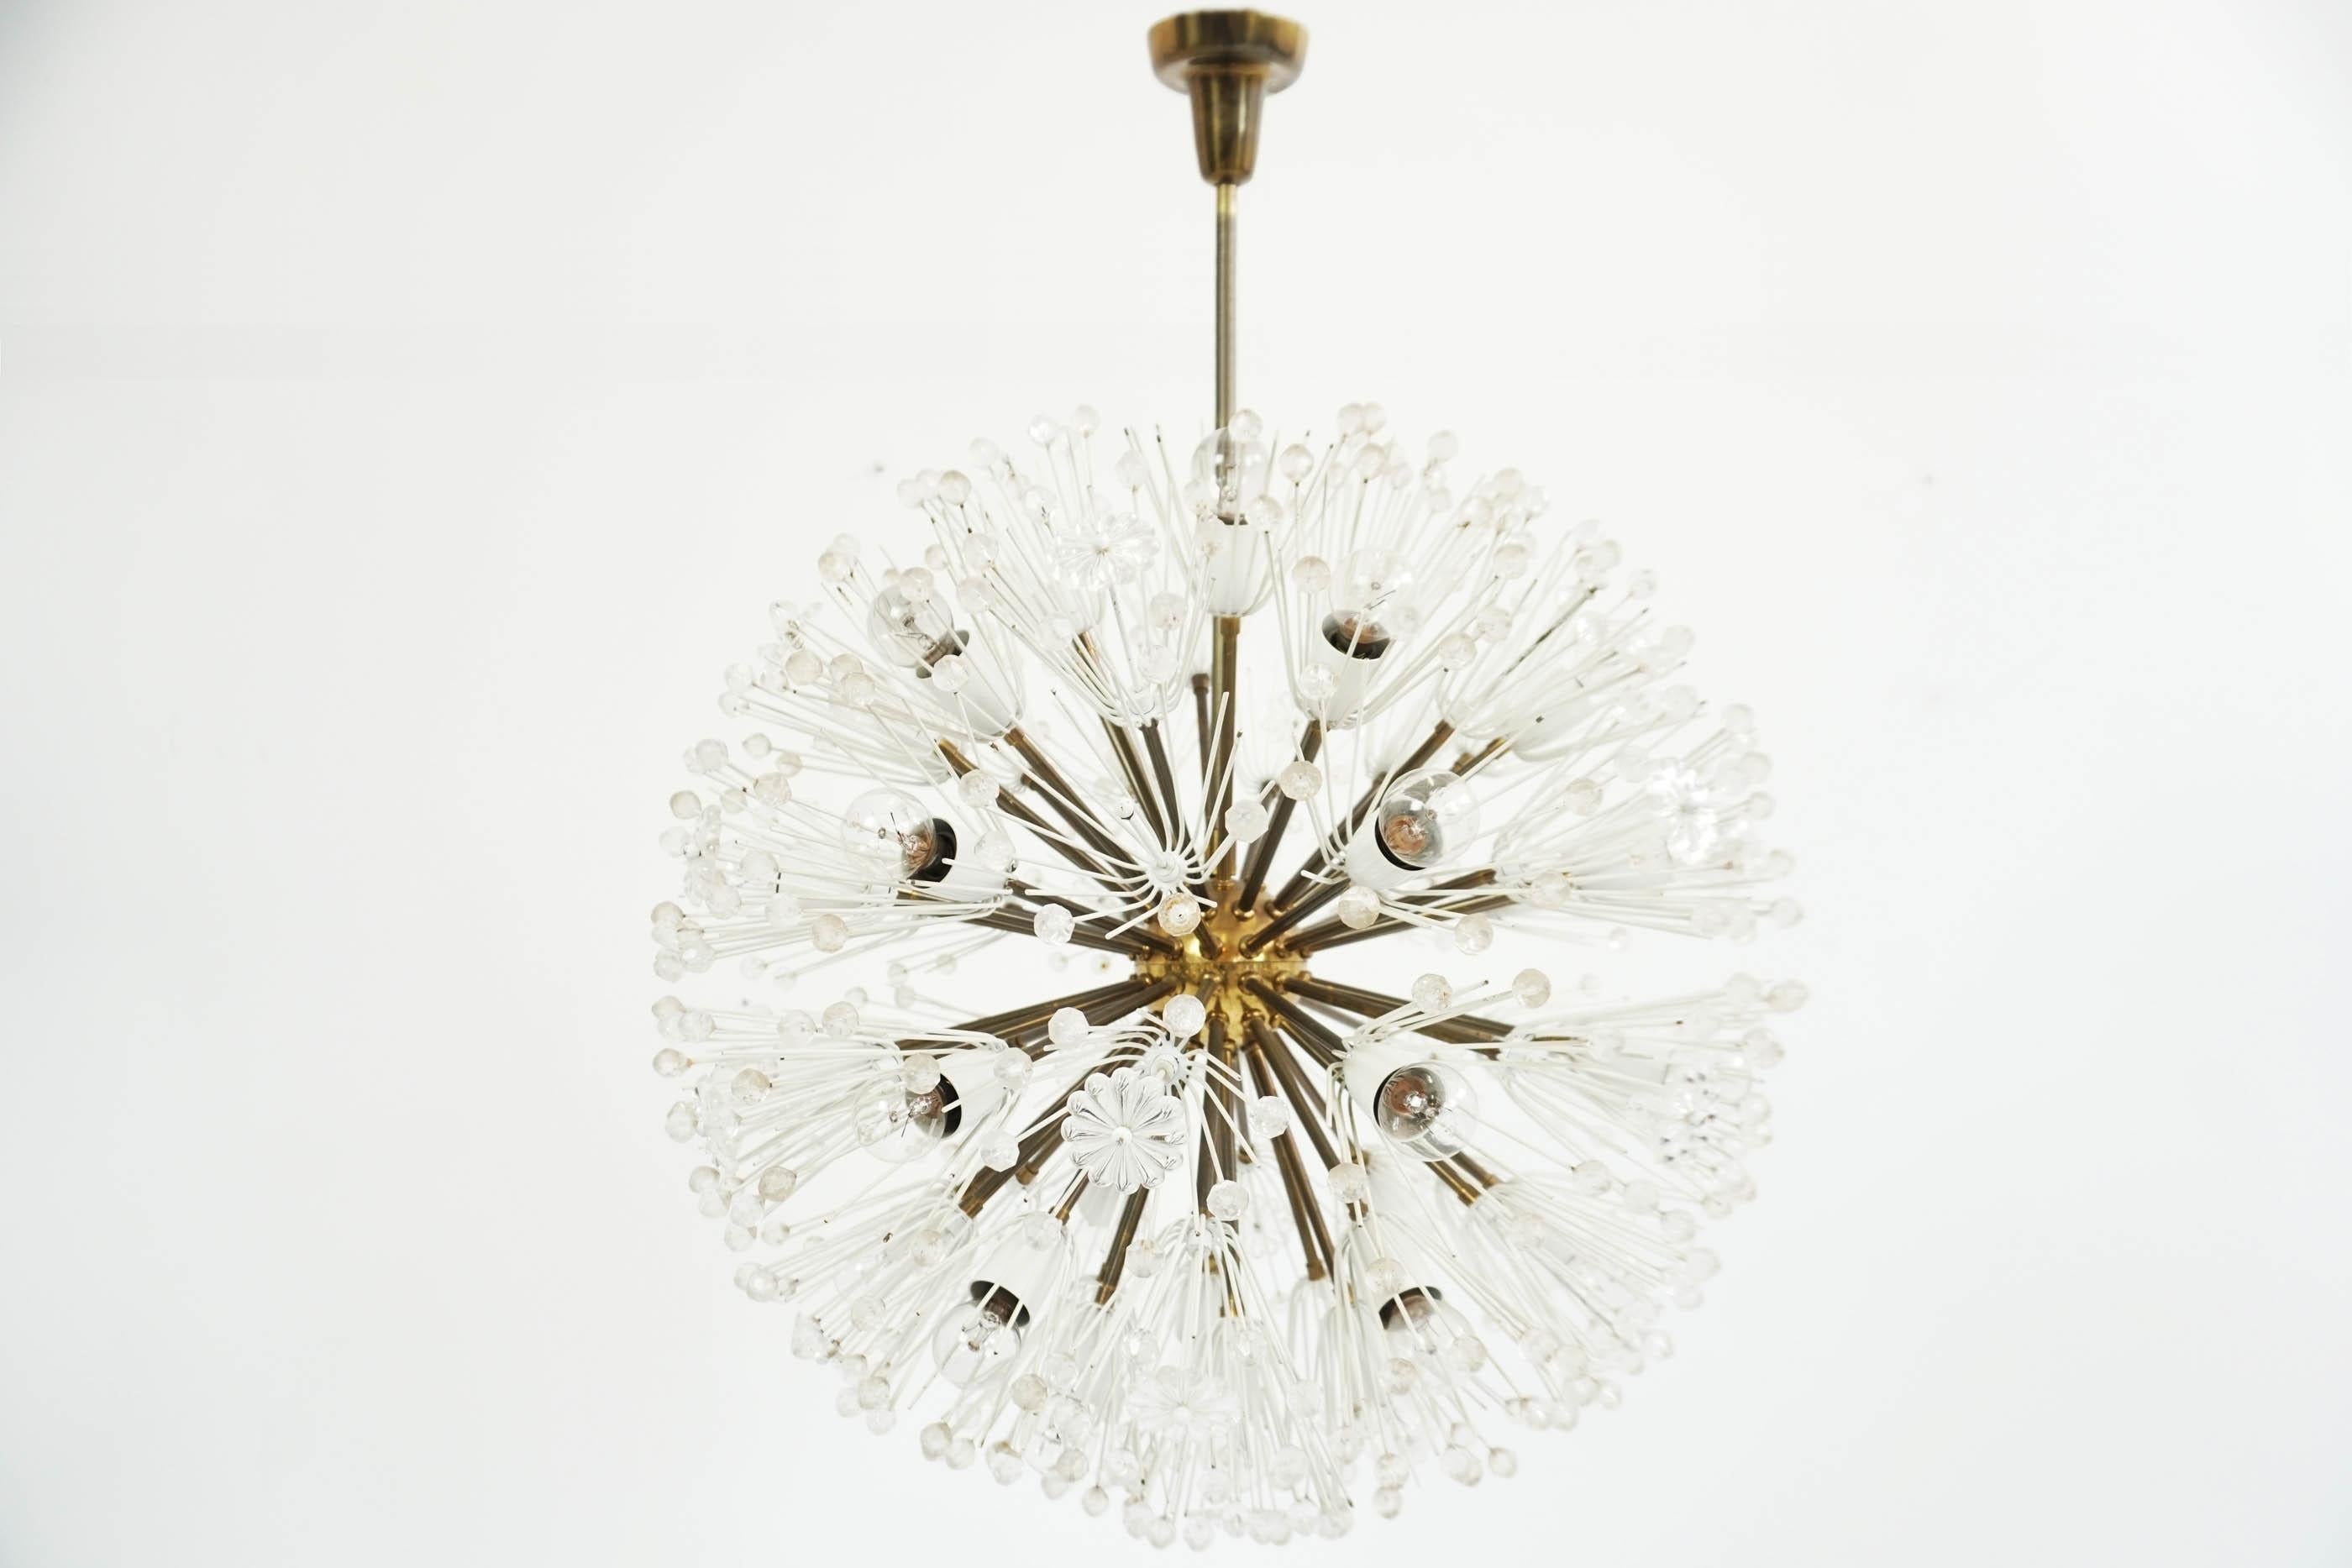 Fabulous brass and ceselled crystal Sputnik chandelier made in Austria 1955
Designed by Emil Stejnar and produced by Rupert Nikoll.
 